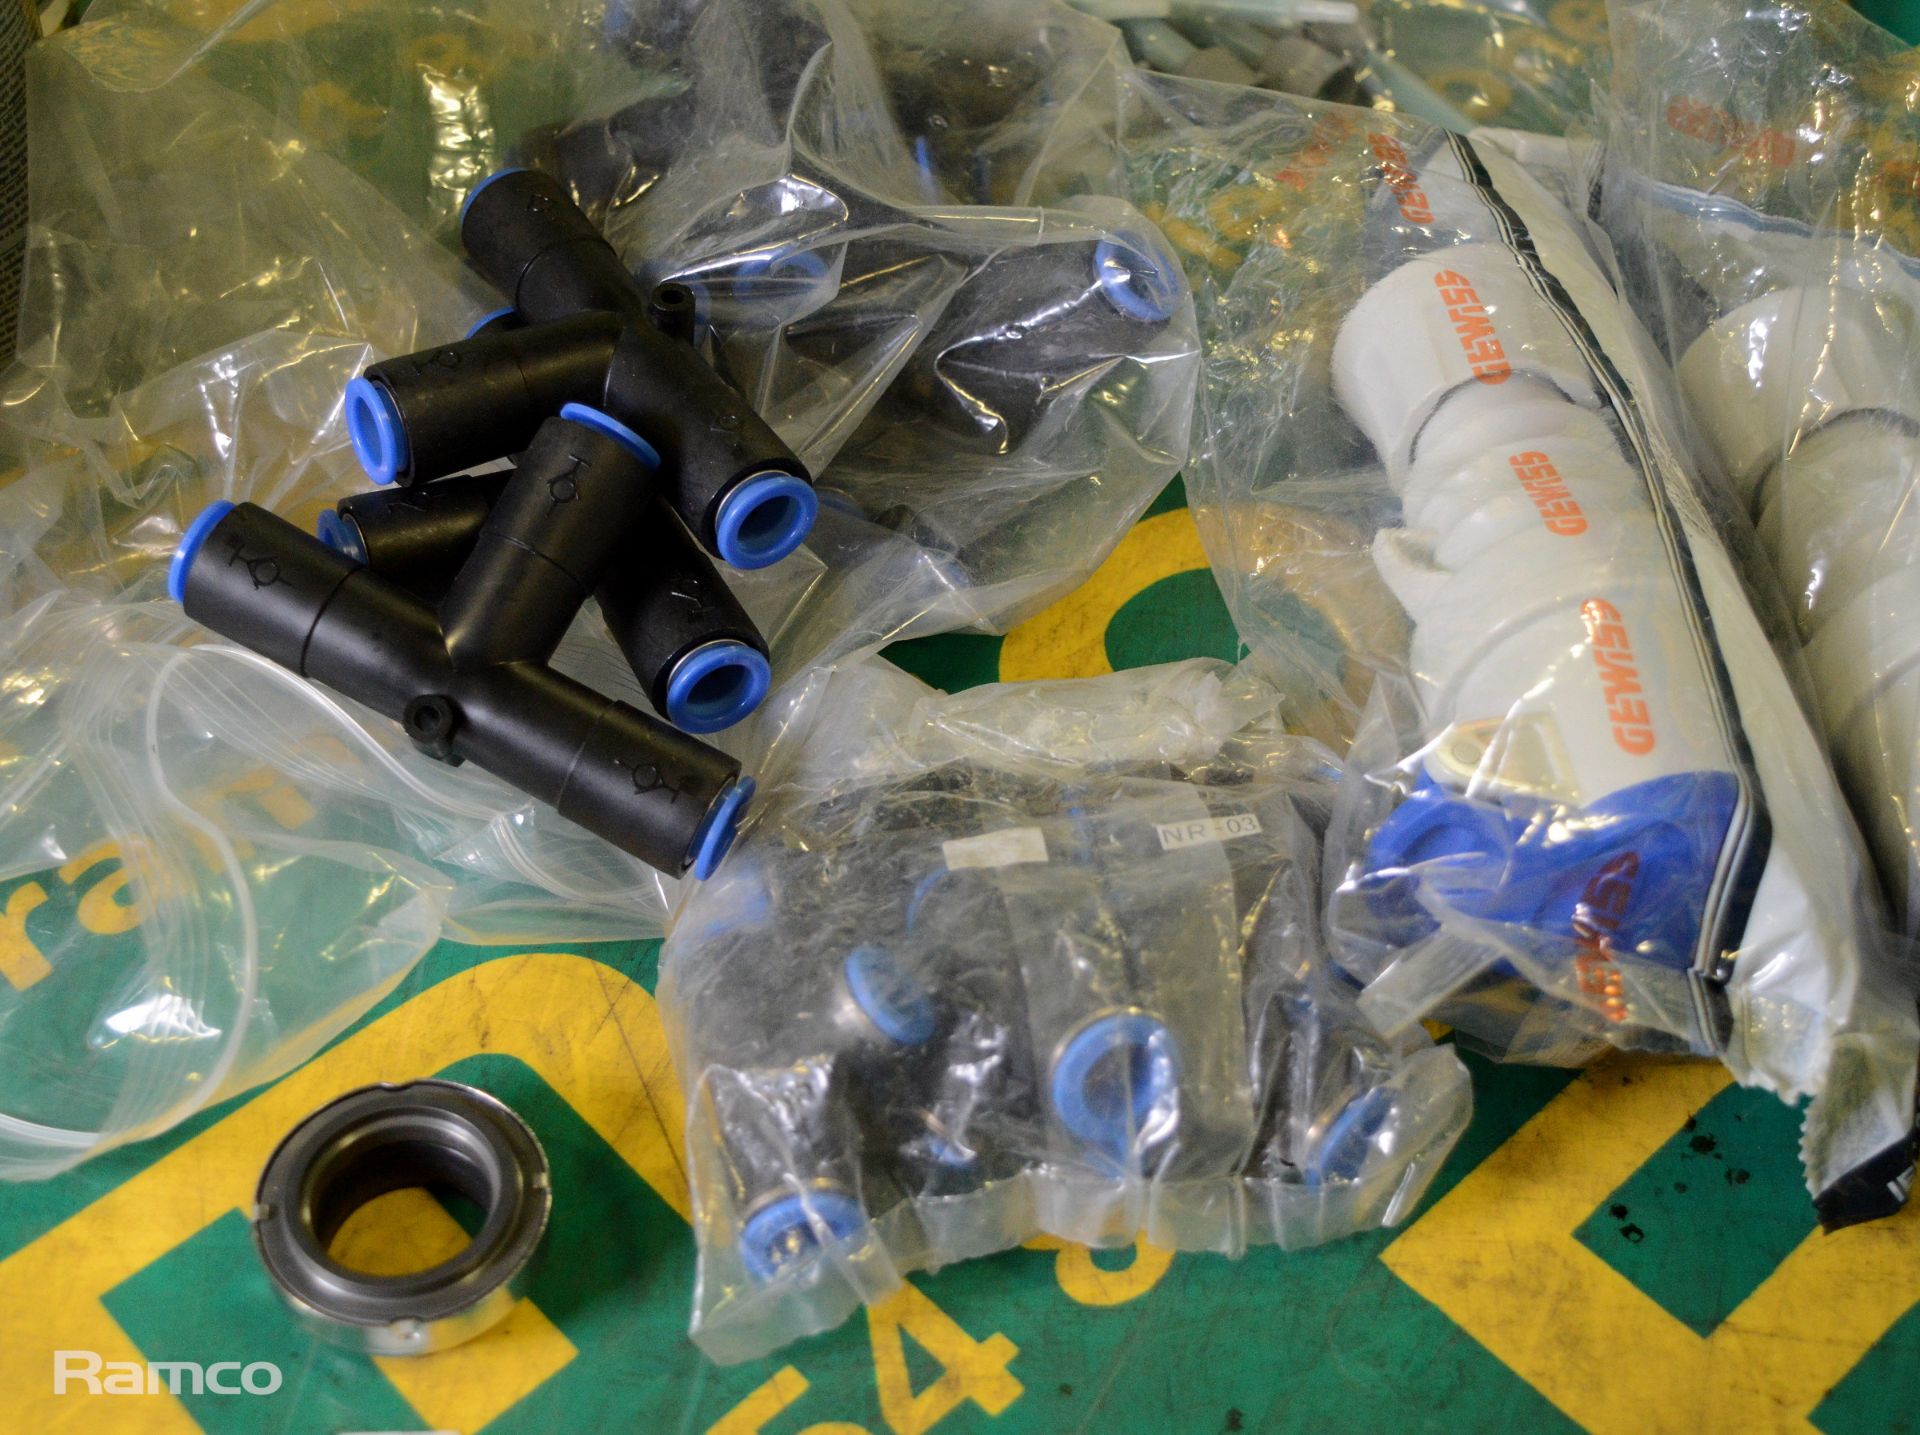 Blue butts, Griffon PVC cleaner, sticker pads, connectors - Image 6 of 6